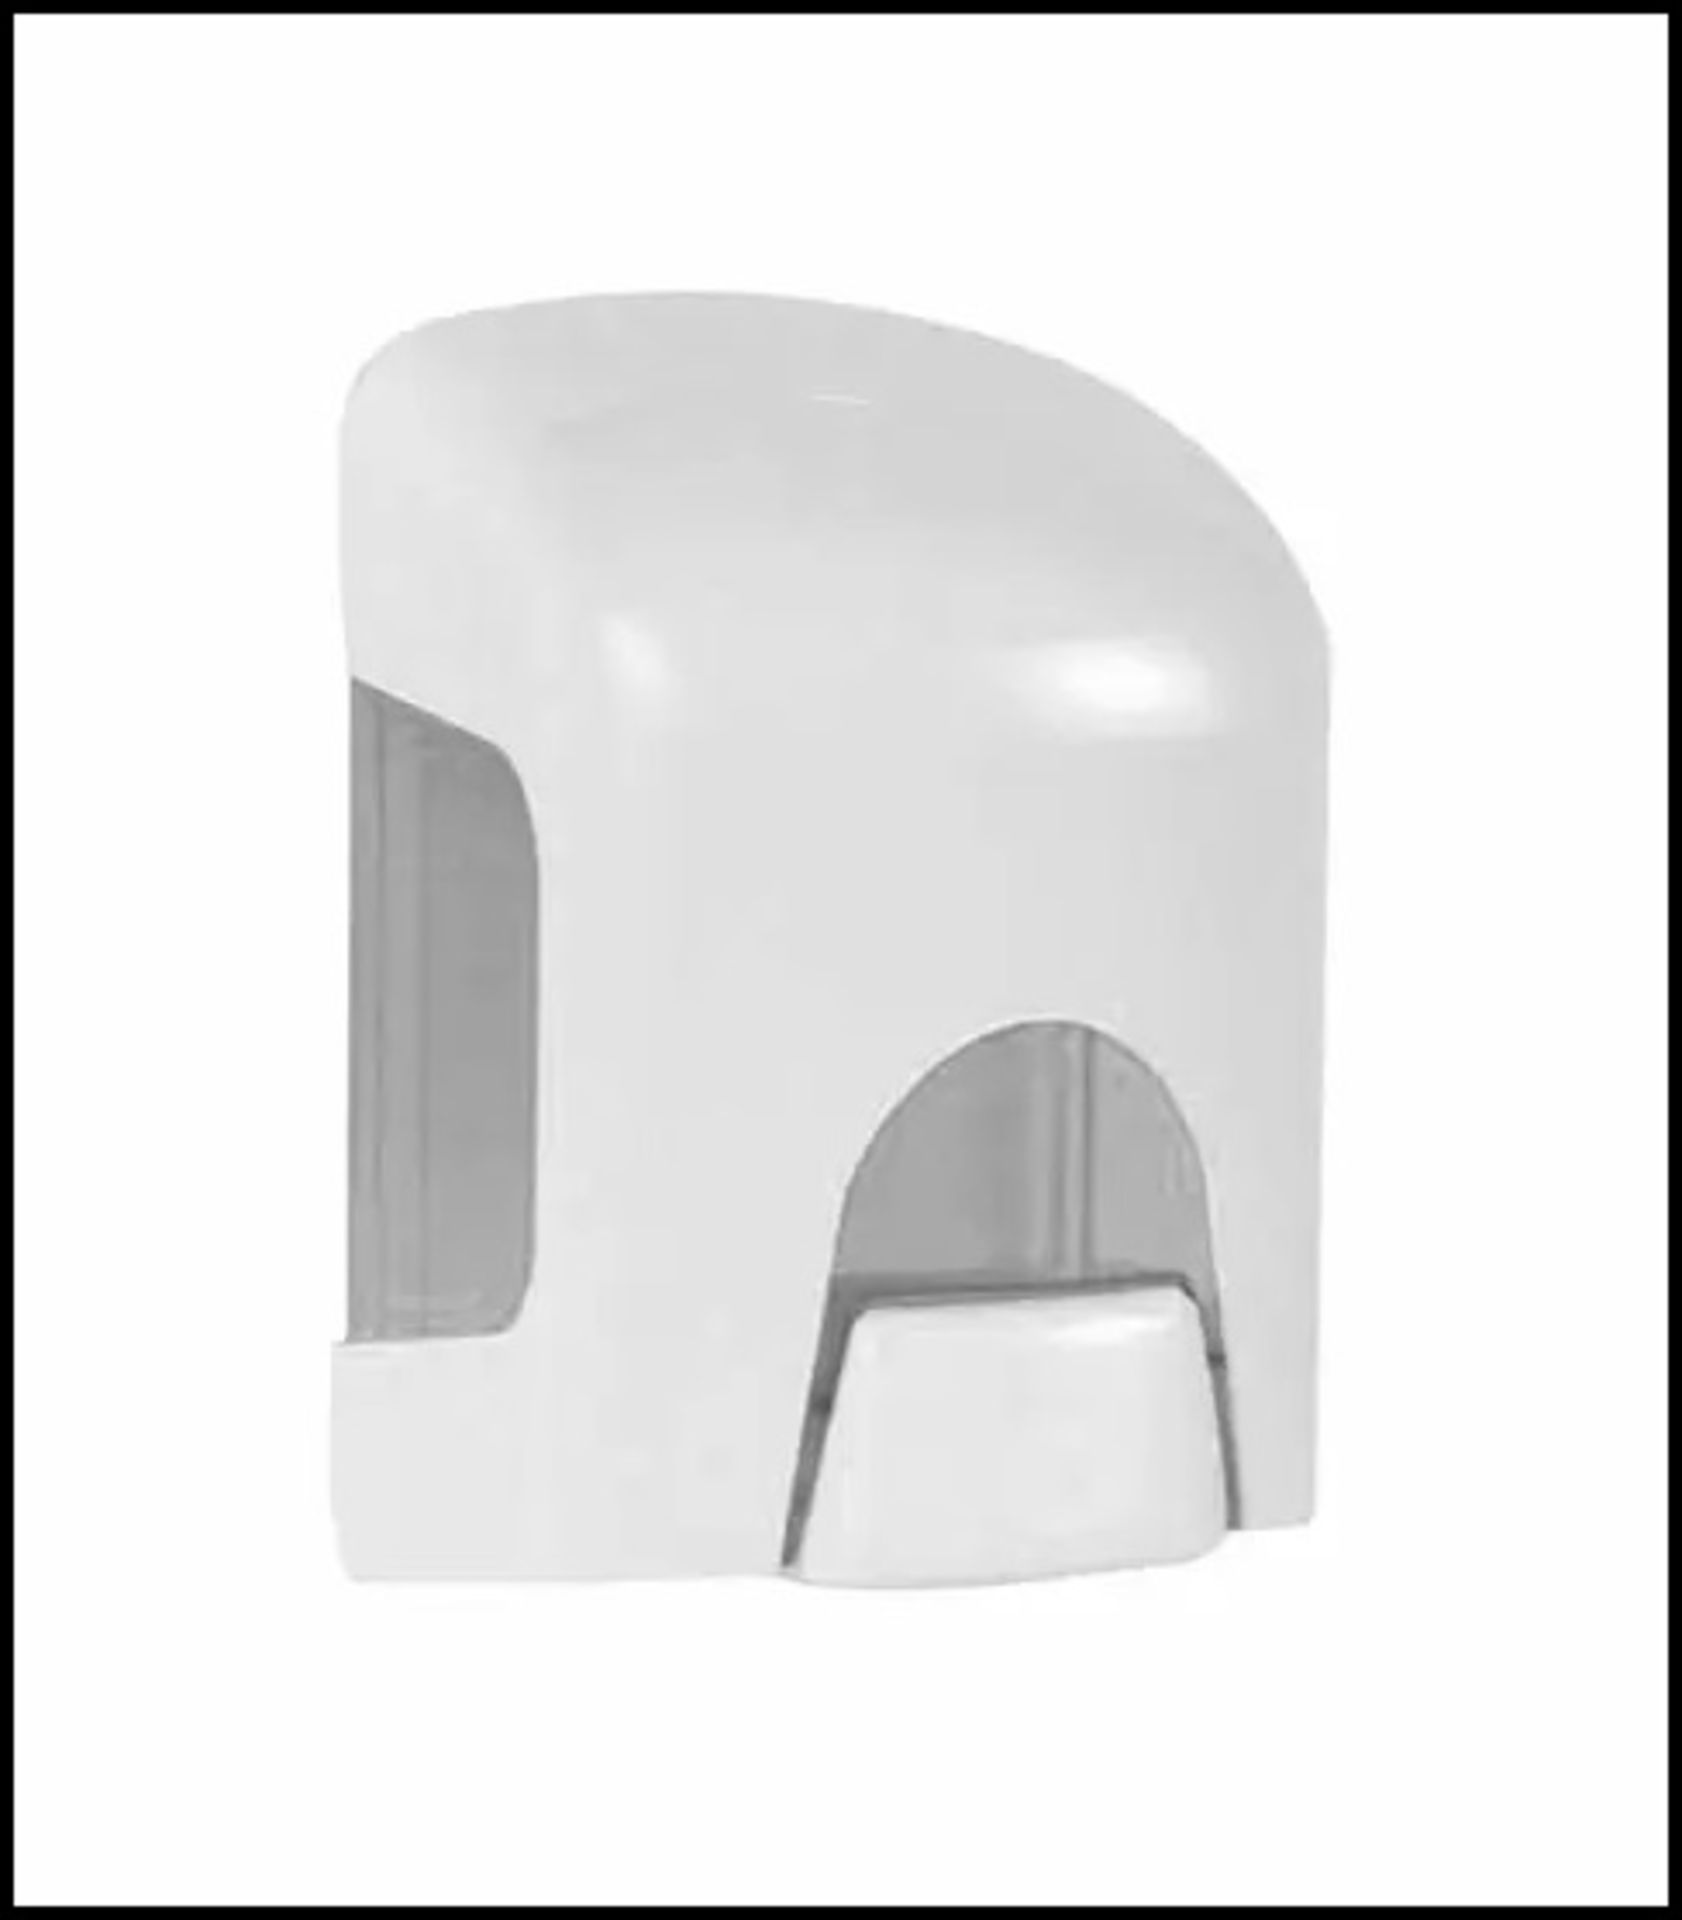 18 x Hydro 800ml Refillable Liquid Soap Dispensers - Lockable Wall Mounted Dispensers Made From